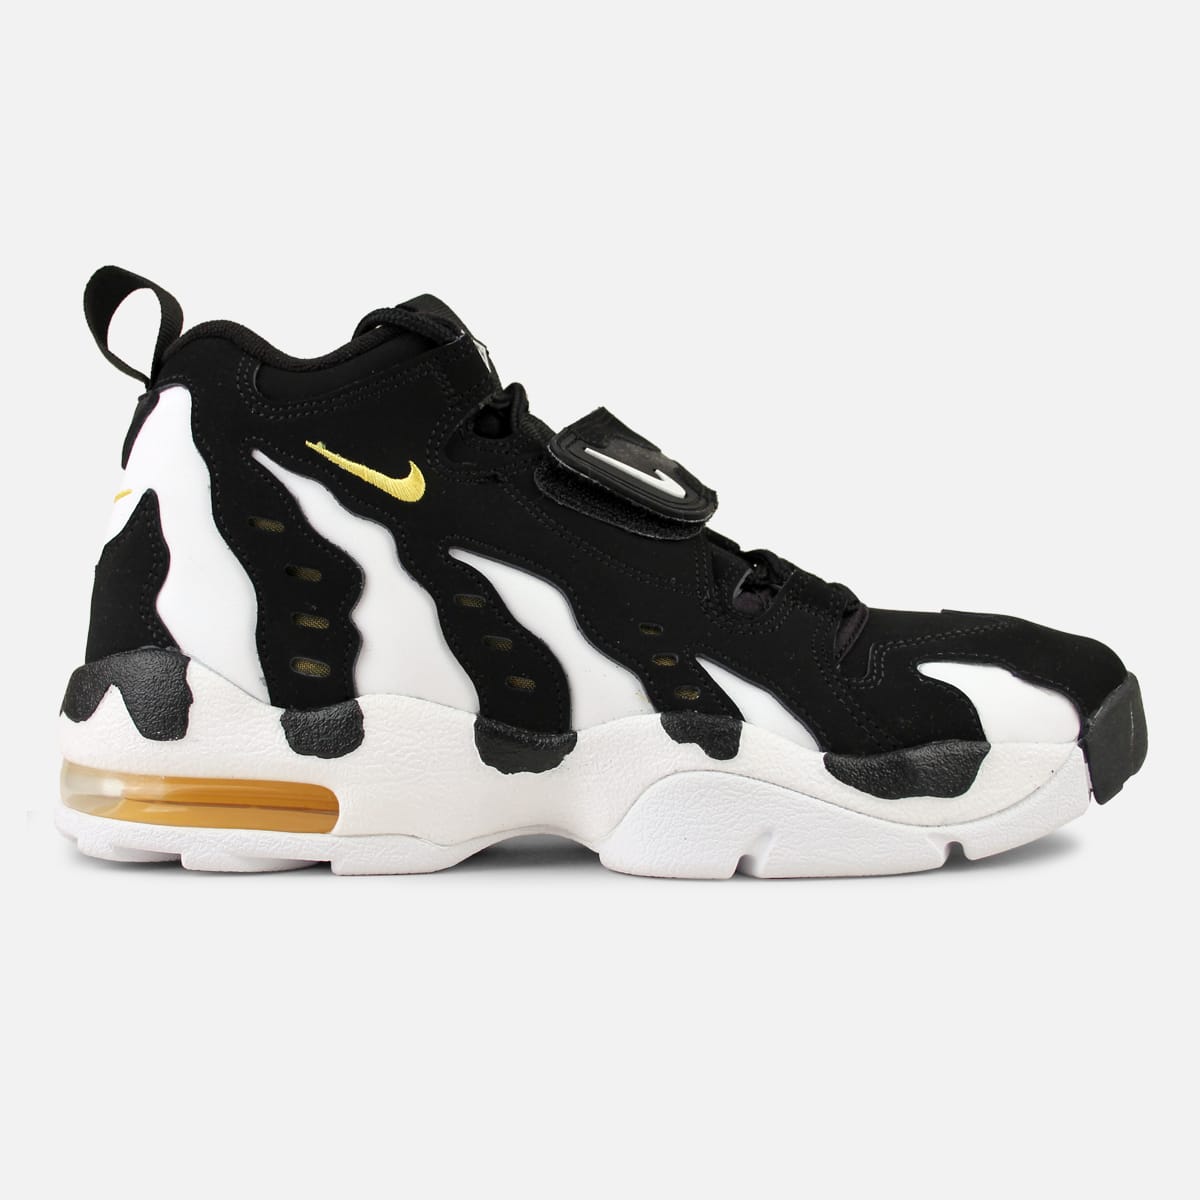 Nike Air DT Max 96 Nike Sole Collector